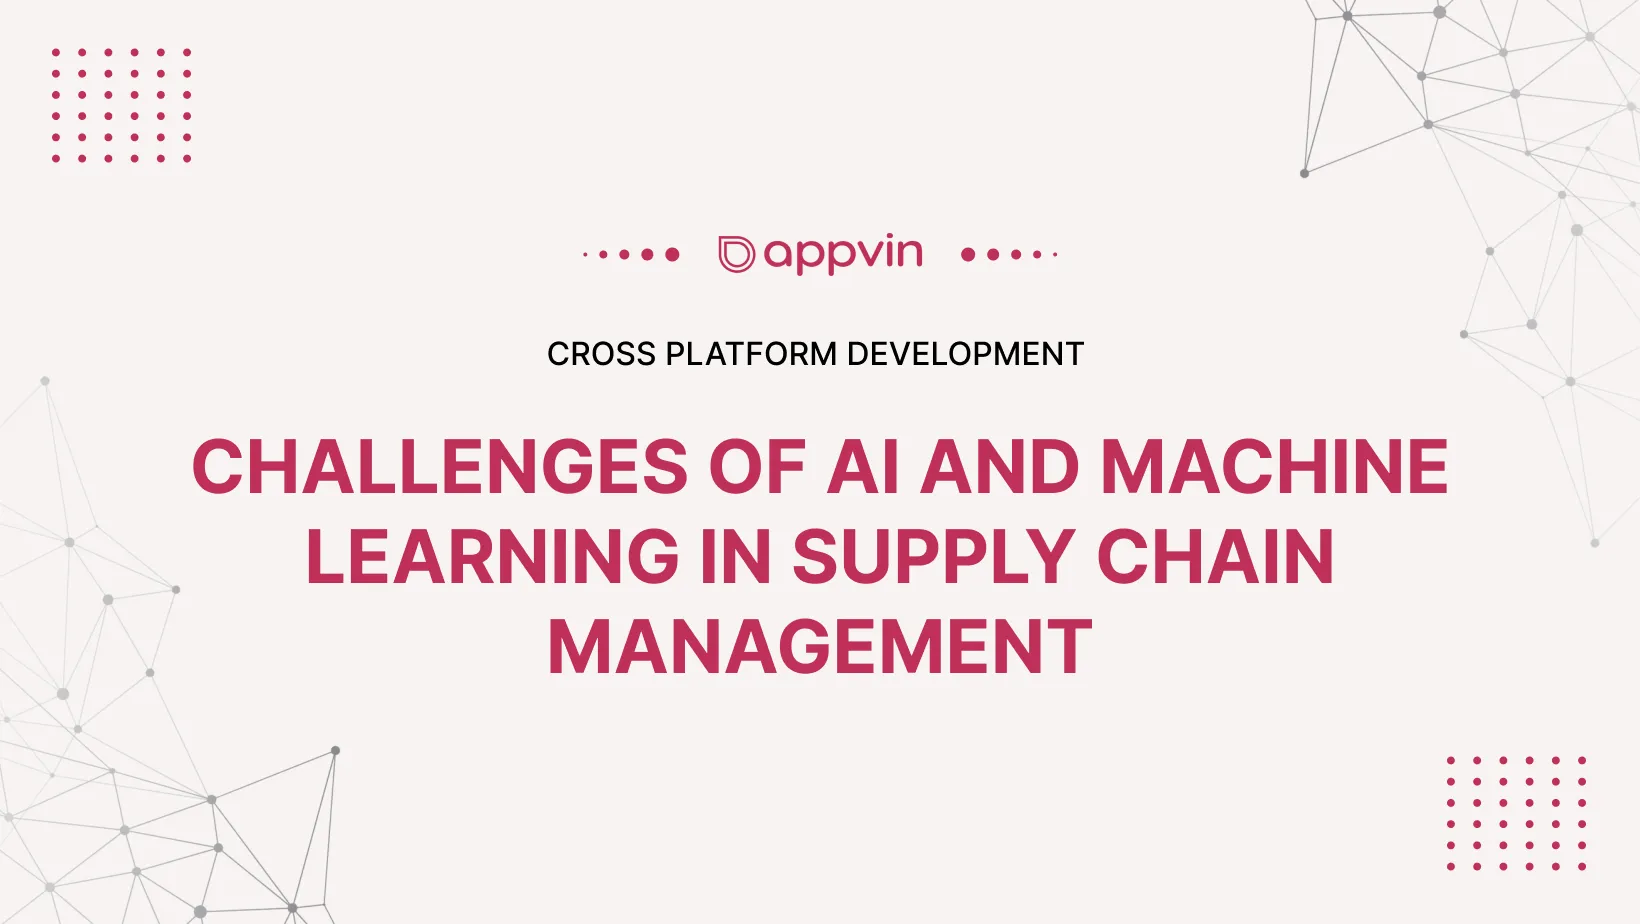 Challenges of AI and Machine Learning in Supply Chain Management